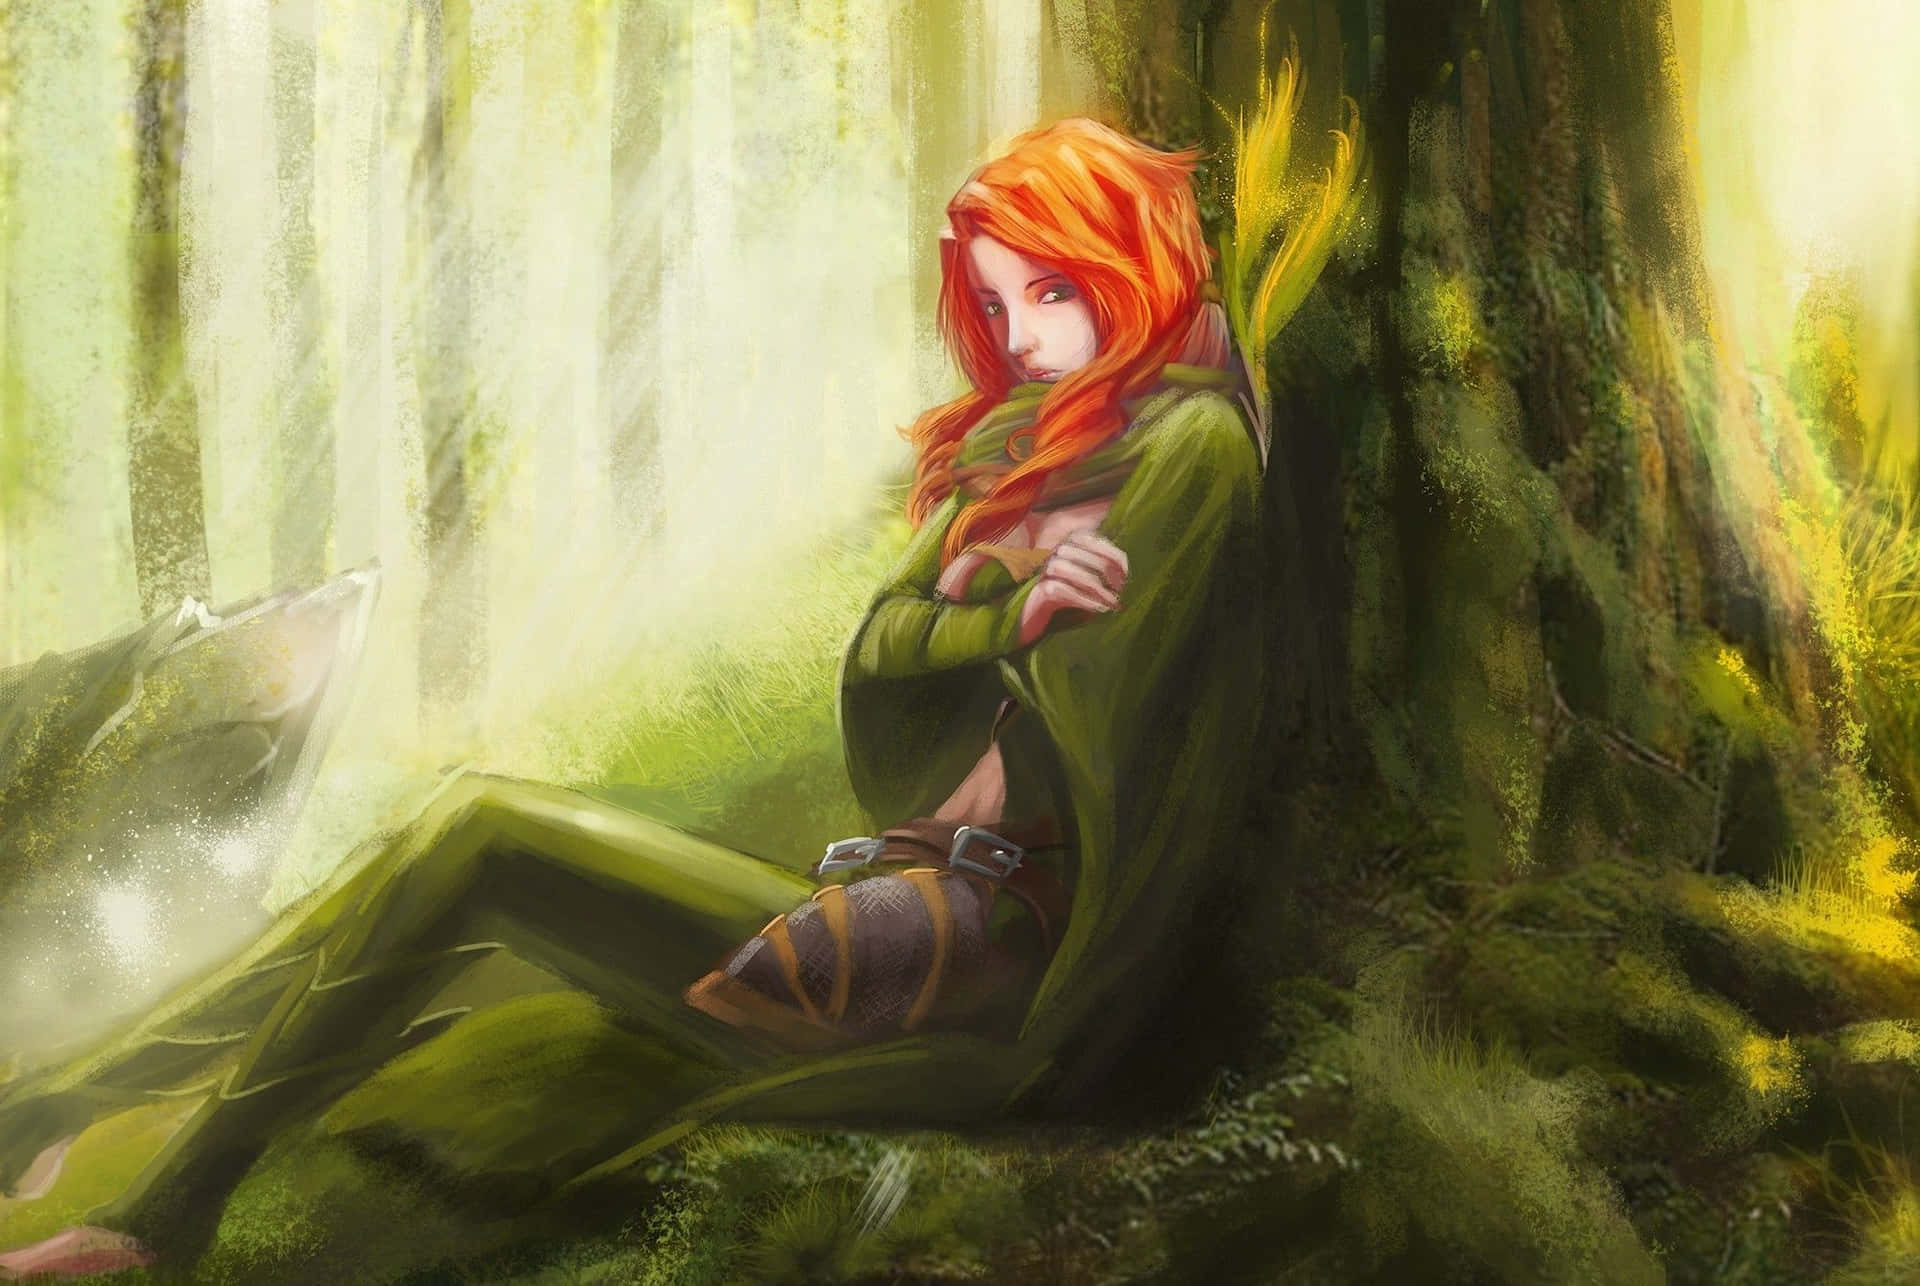 Captivating Windranger: Fierce and Ambitious Wallpaper